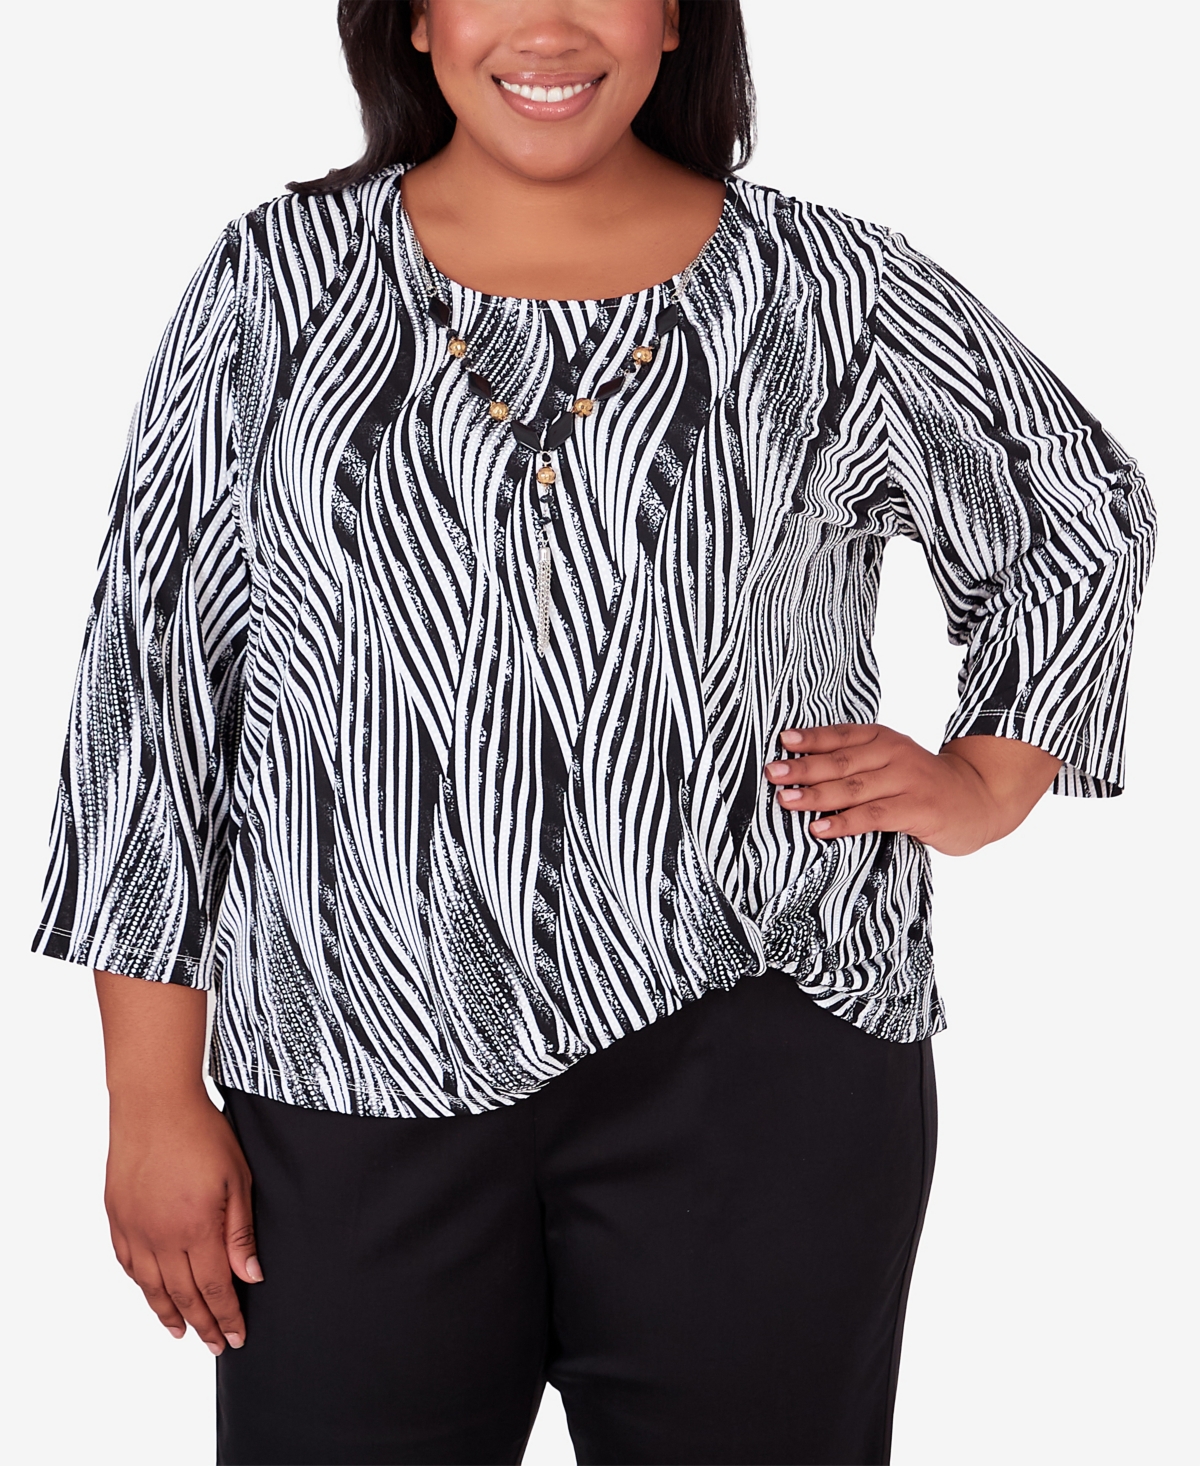 Plus Size Opposites Attract Swirl Top with Necklace - Multi